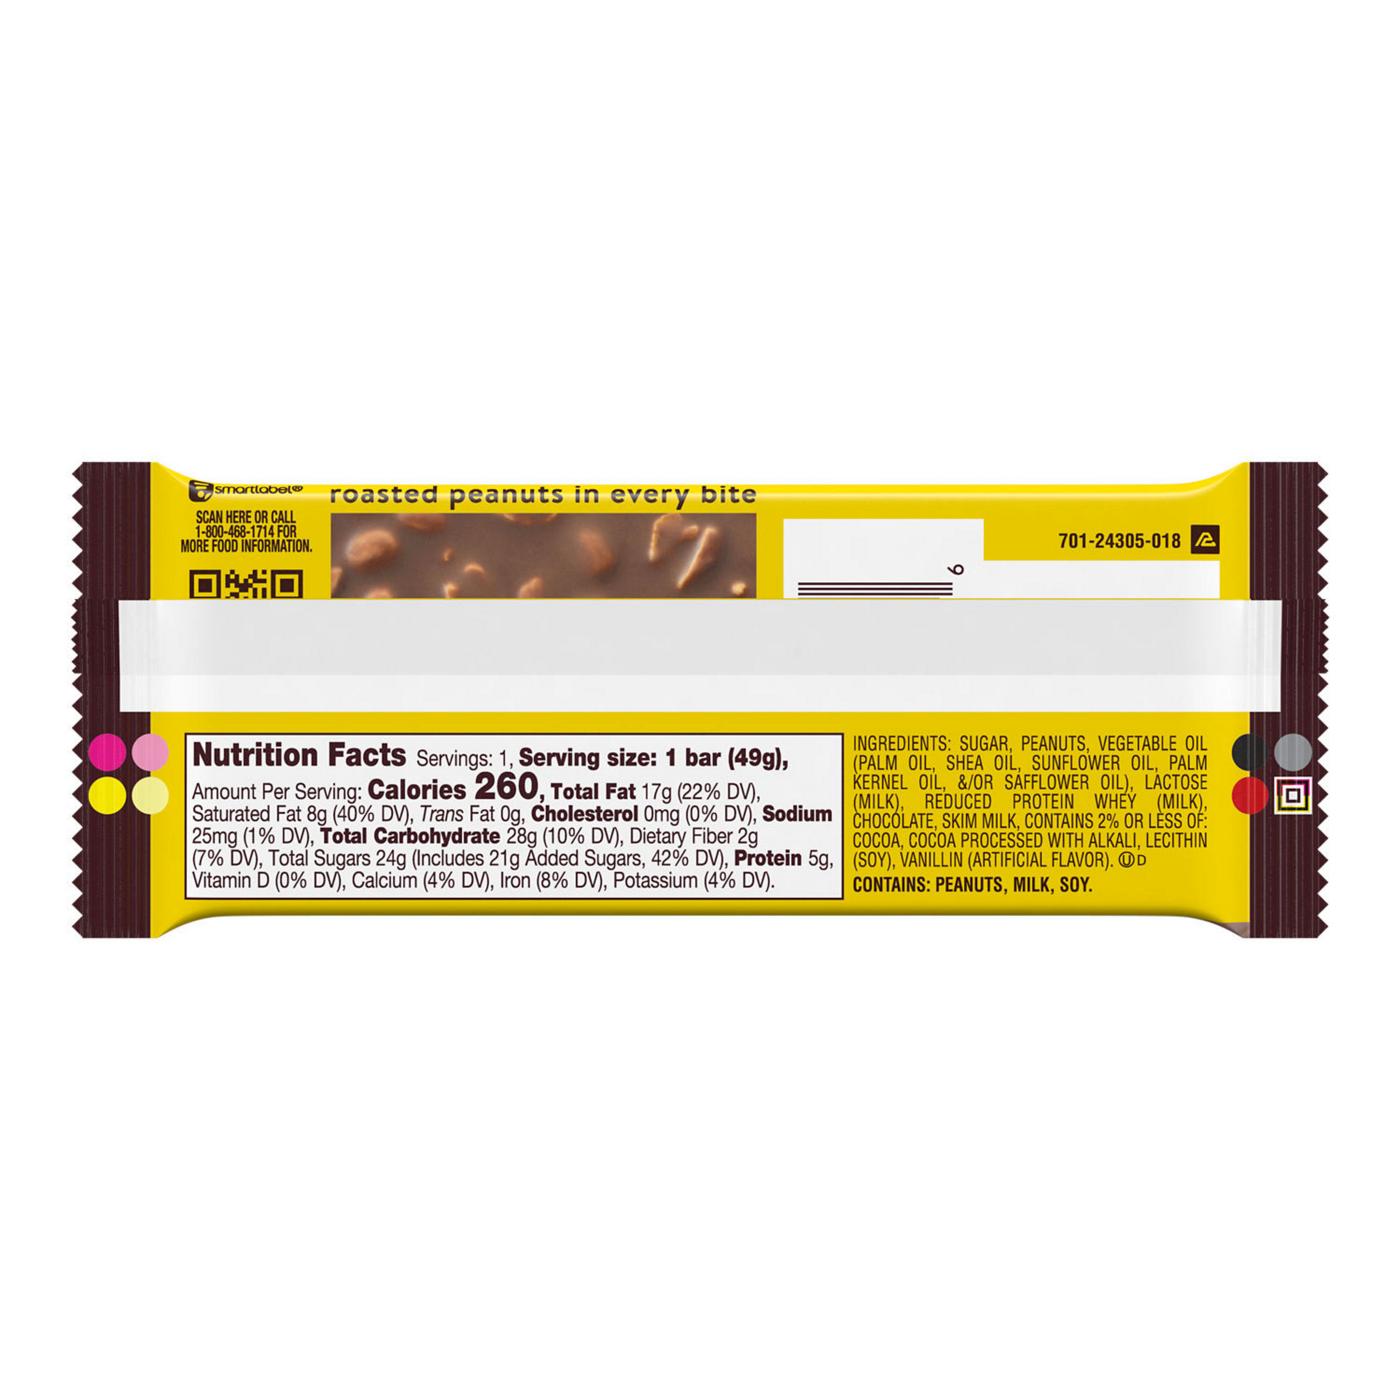 Hershey's Mr. Goodbar Chocolate with Peanuts Candy Bar; image 4 of 7